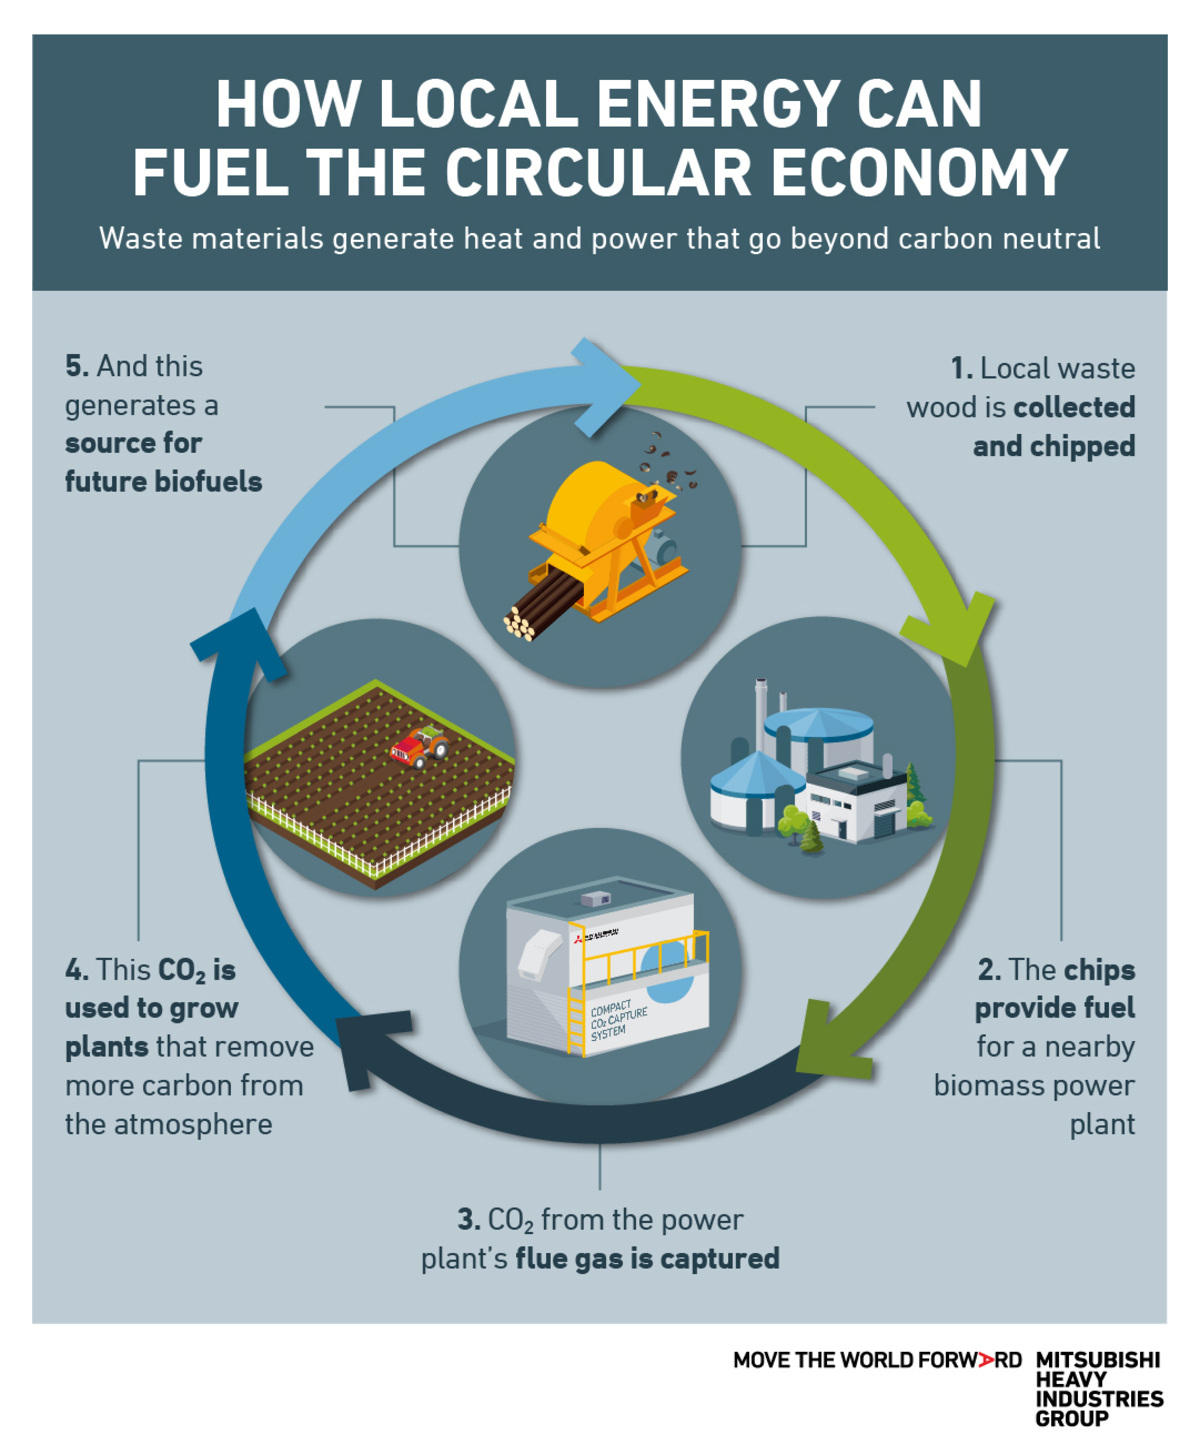 How local energy can fuel the circular economy